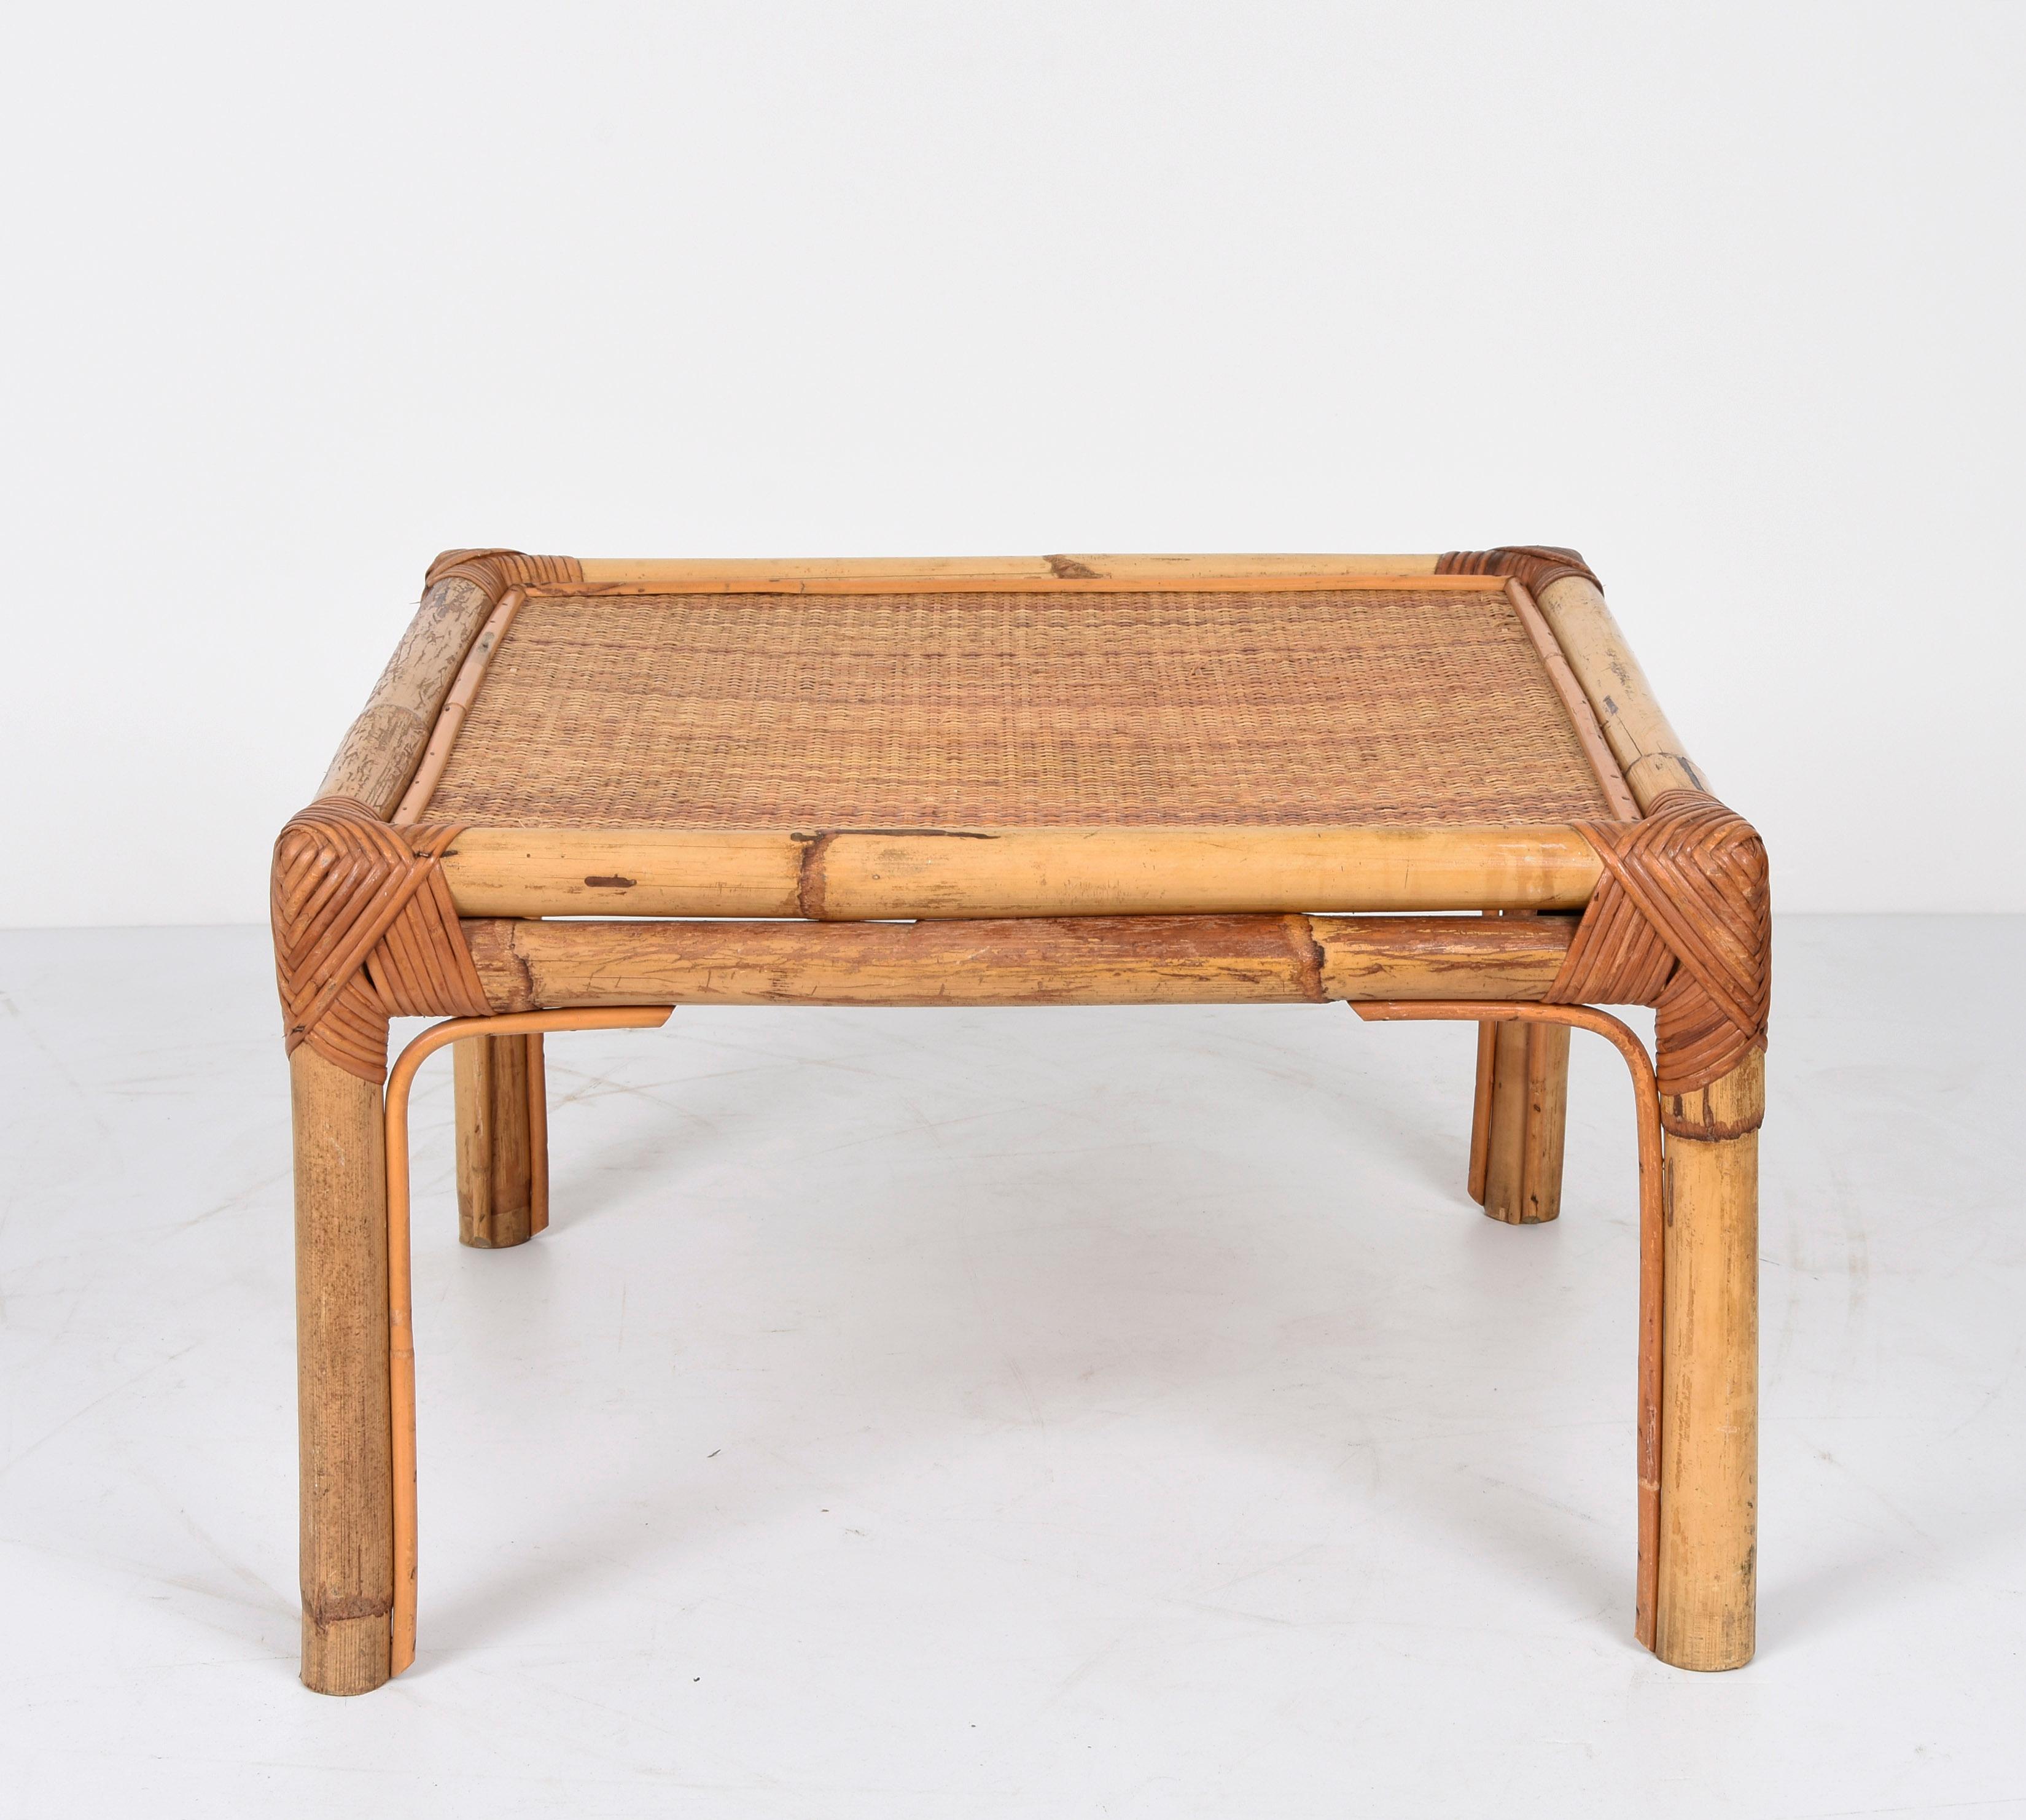 Vivai del Sud Midcentury Italian Squared Bamboo and Rattan Coffee Table, 1970 For Sale 5